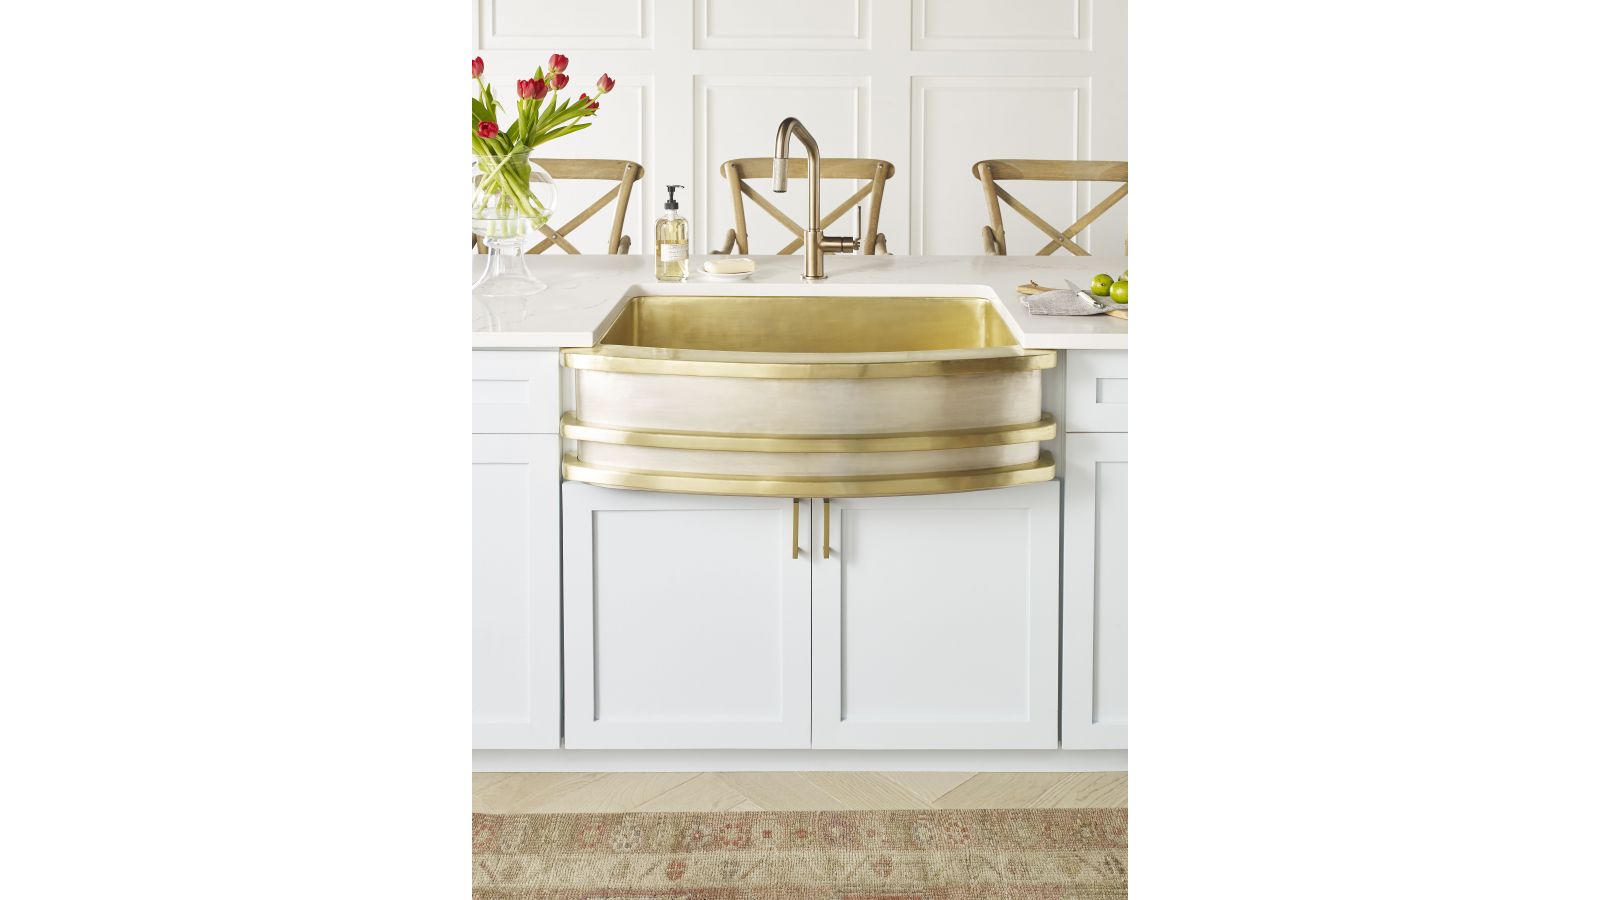 Quintana Handcrafted Farmhouse Kitchen Sink